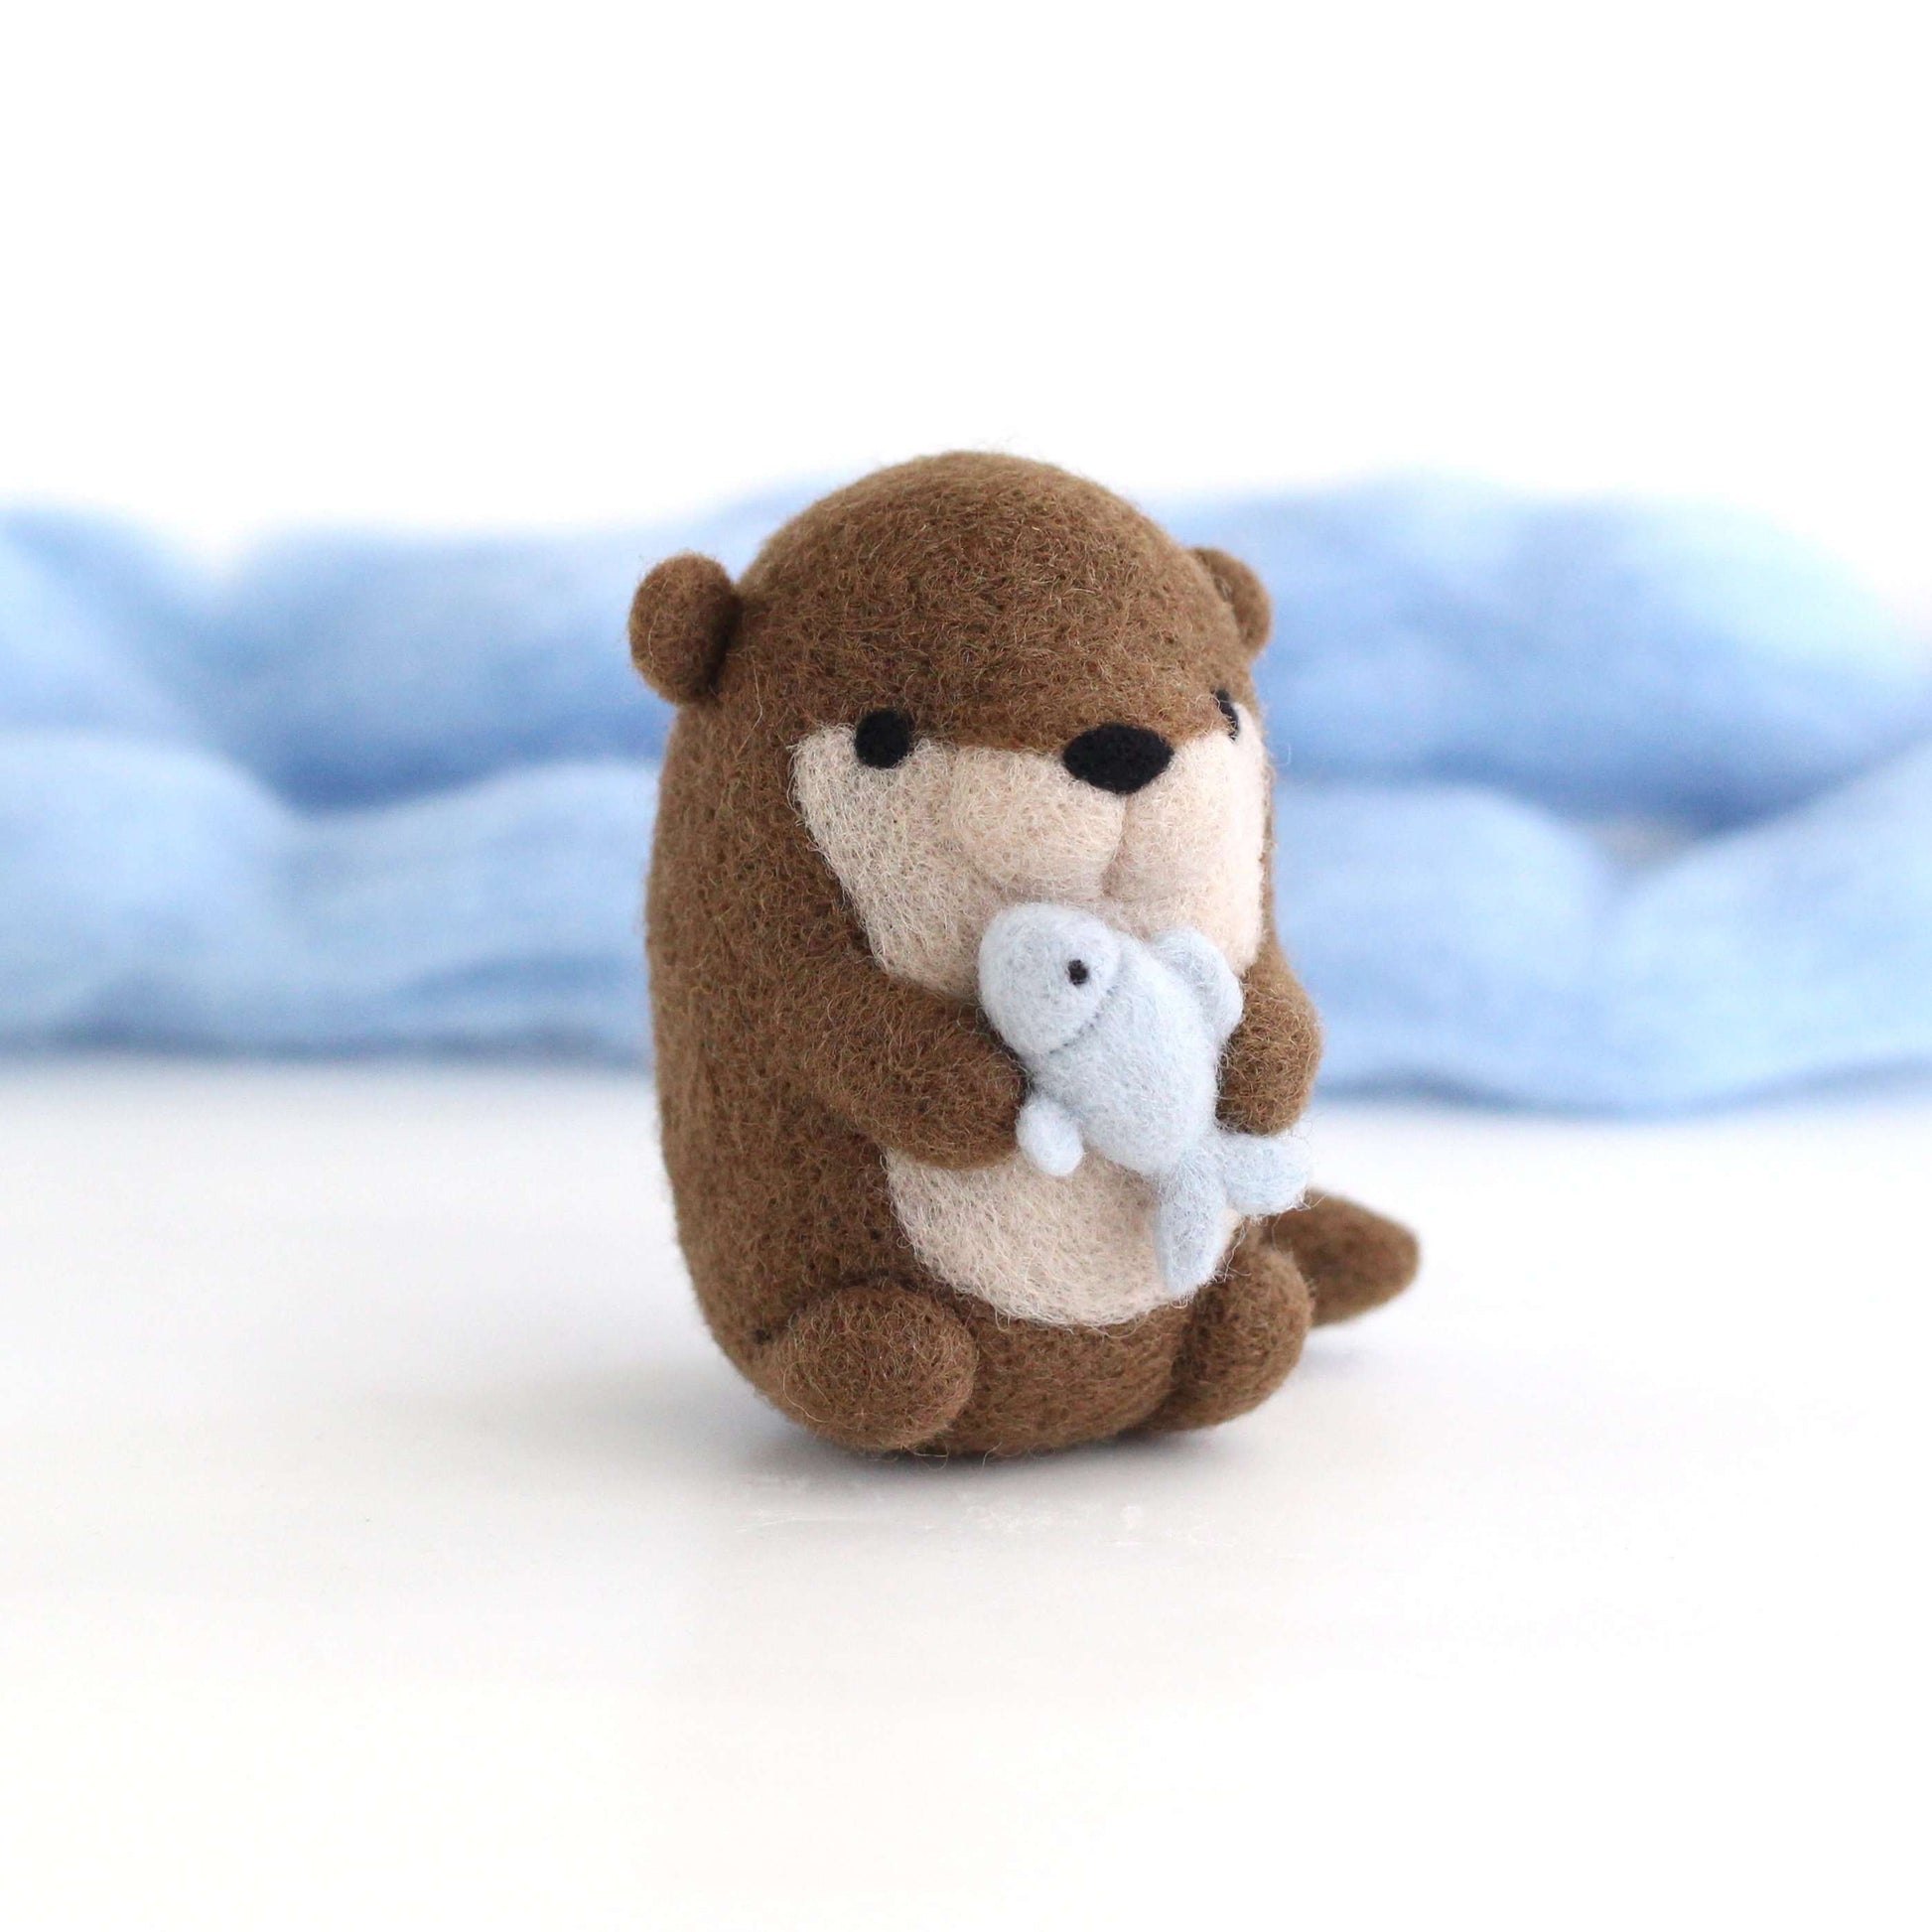 Needle Felted River Otter holding Fish by Wild Whimsy Woolies